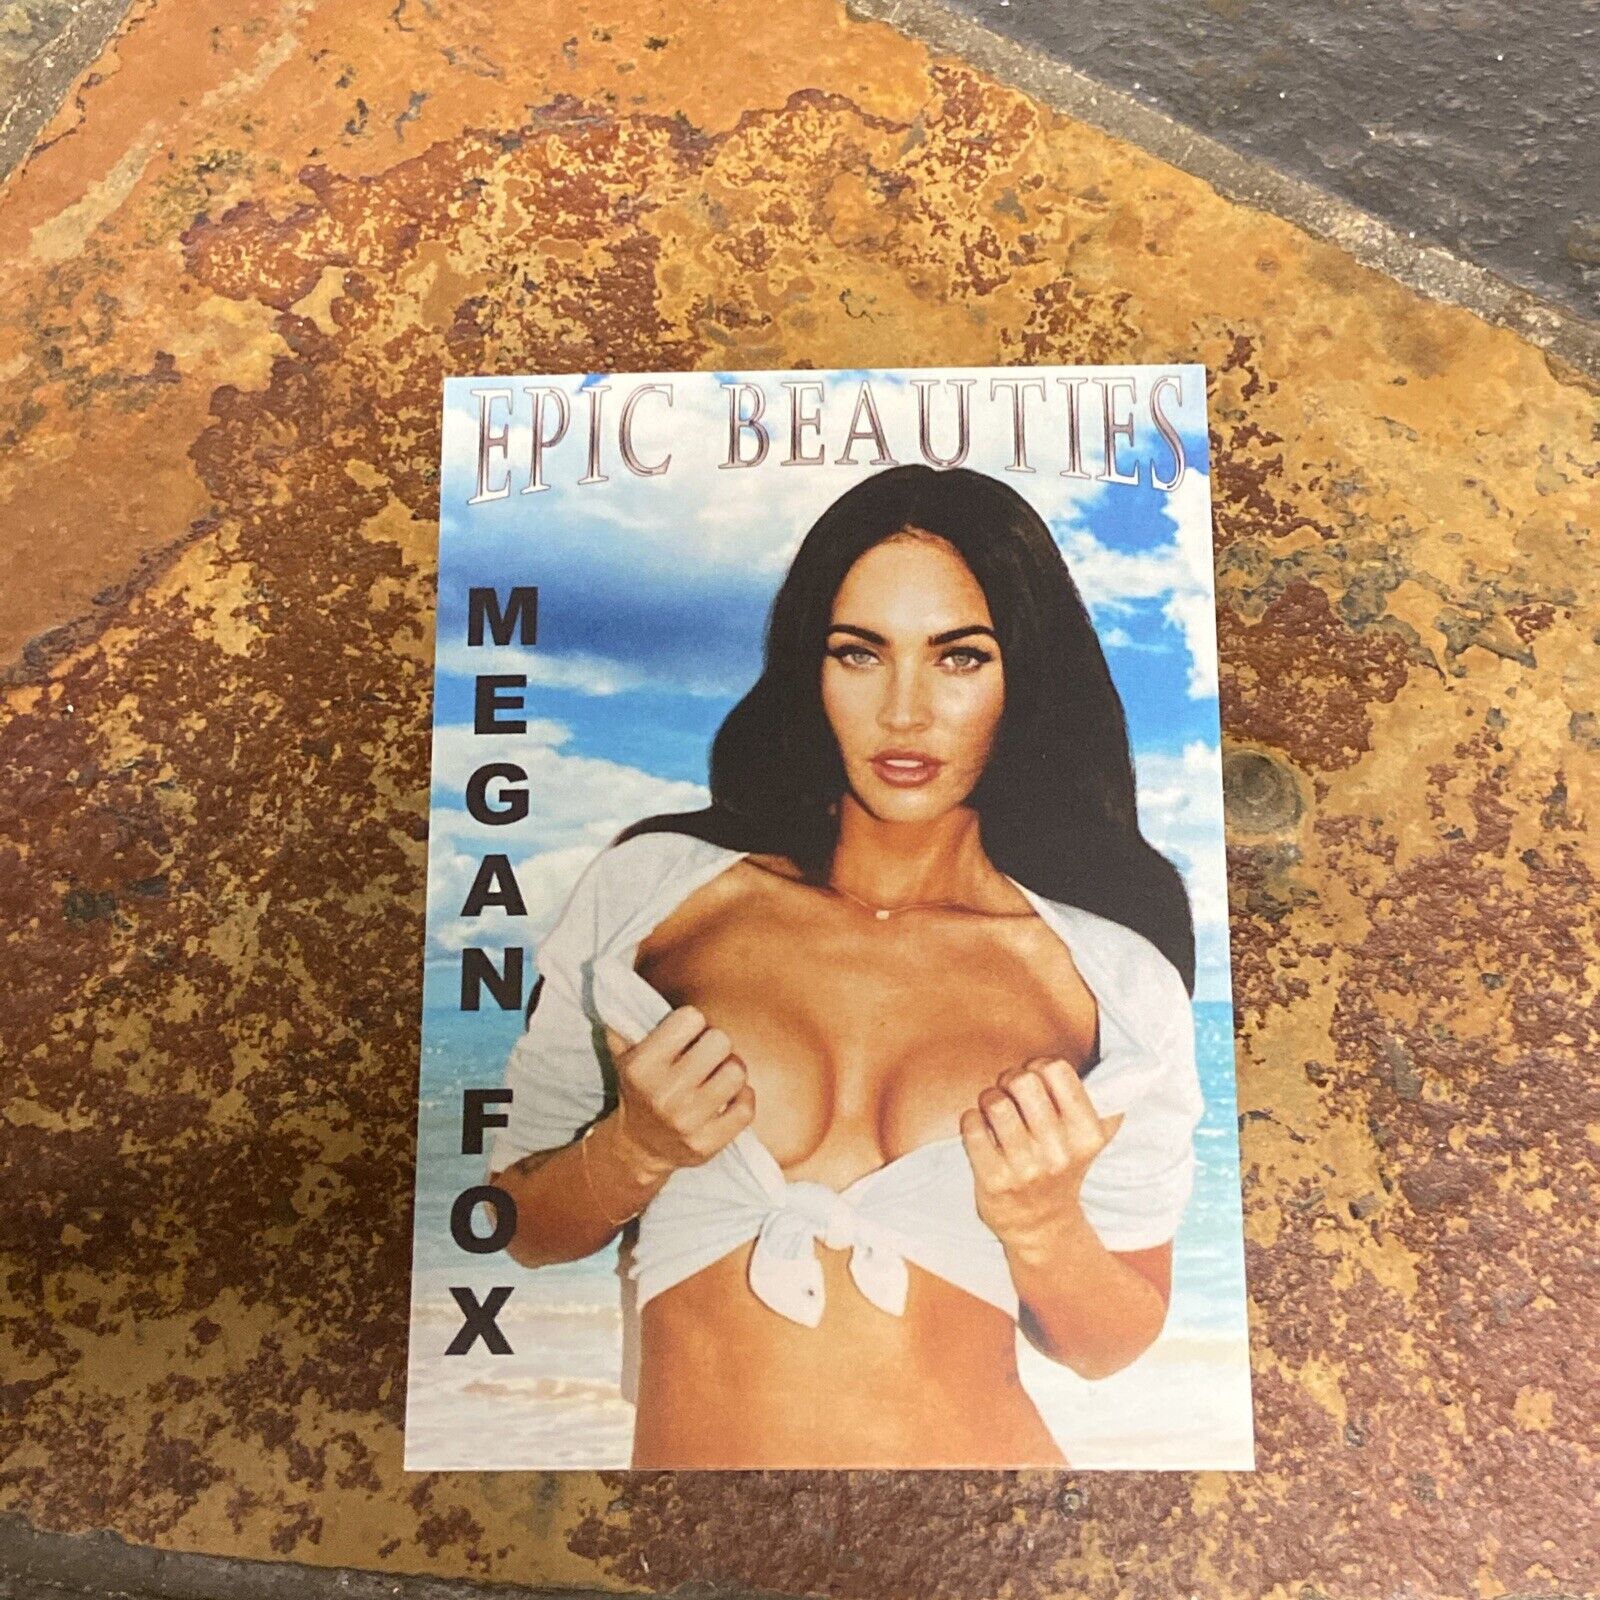 Epic Beauties Megan Fox Series 1 Trading Card #16/20 only 500 made